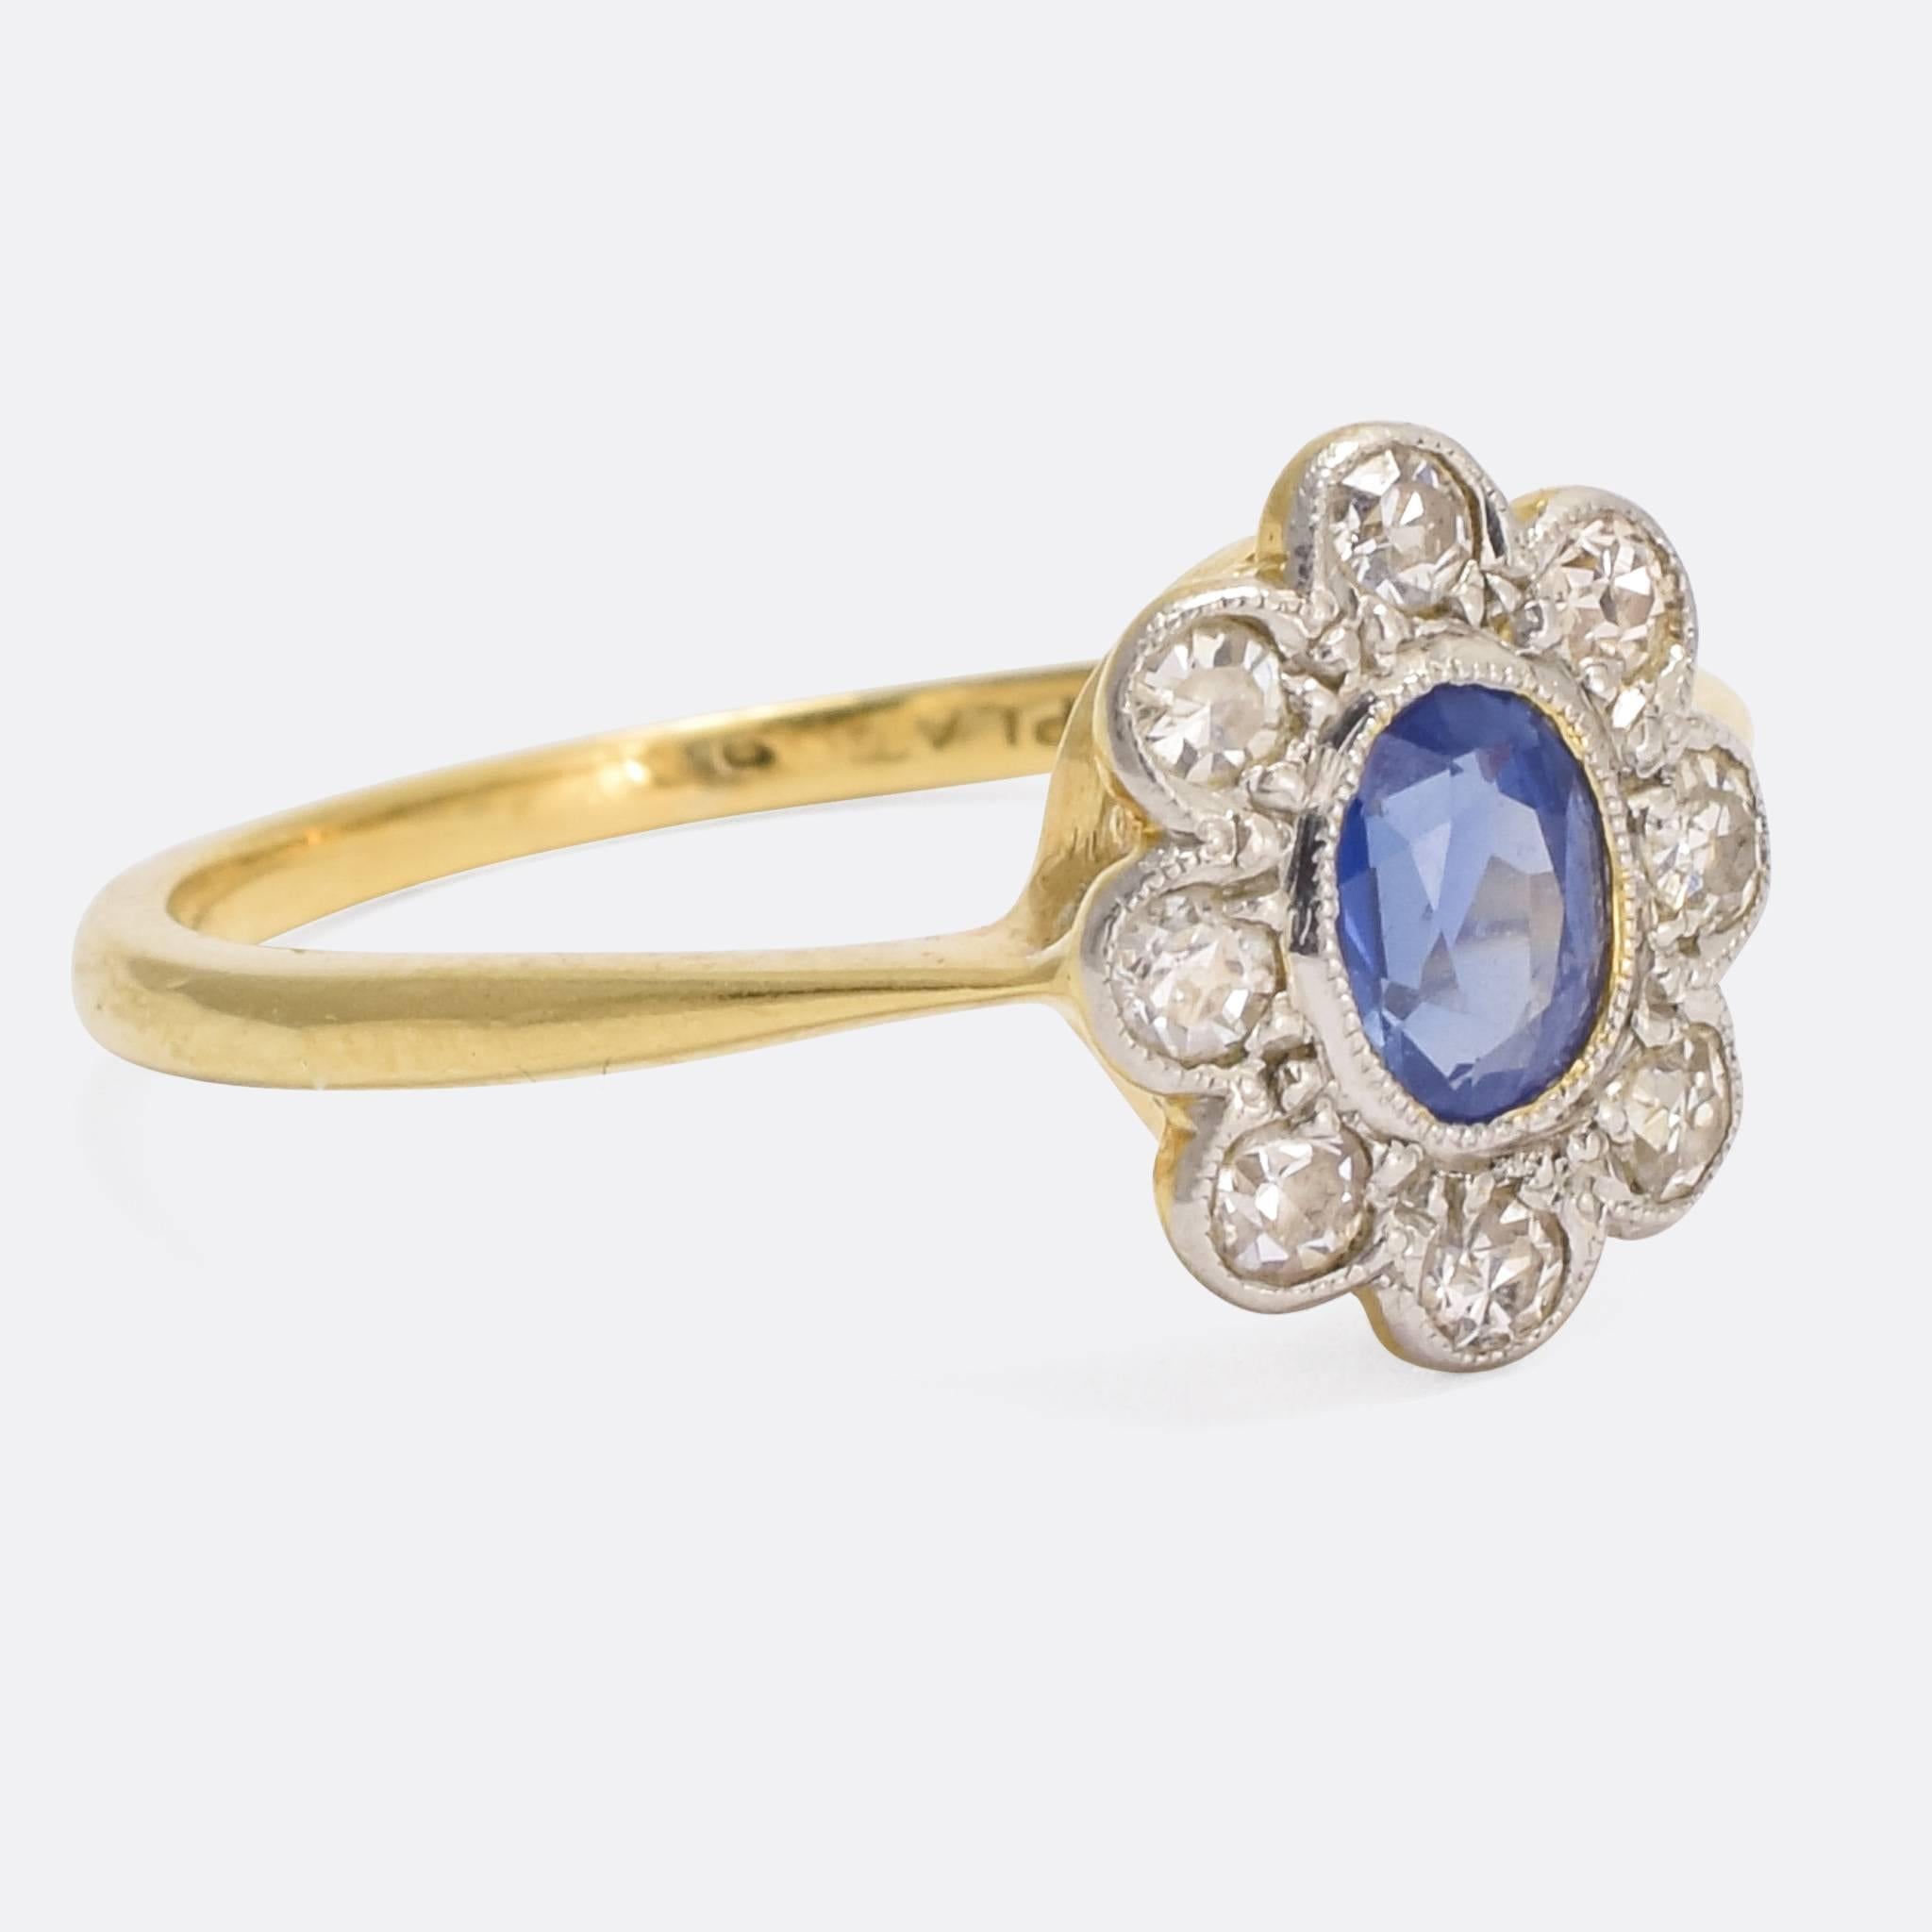 An incredibly pretty antique flower ring, set with eight diamond 